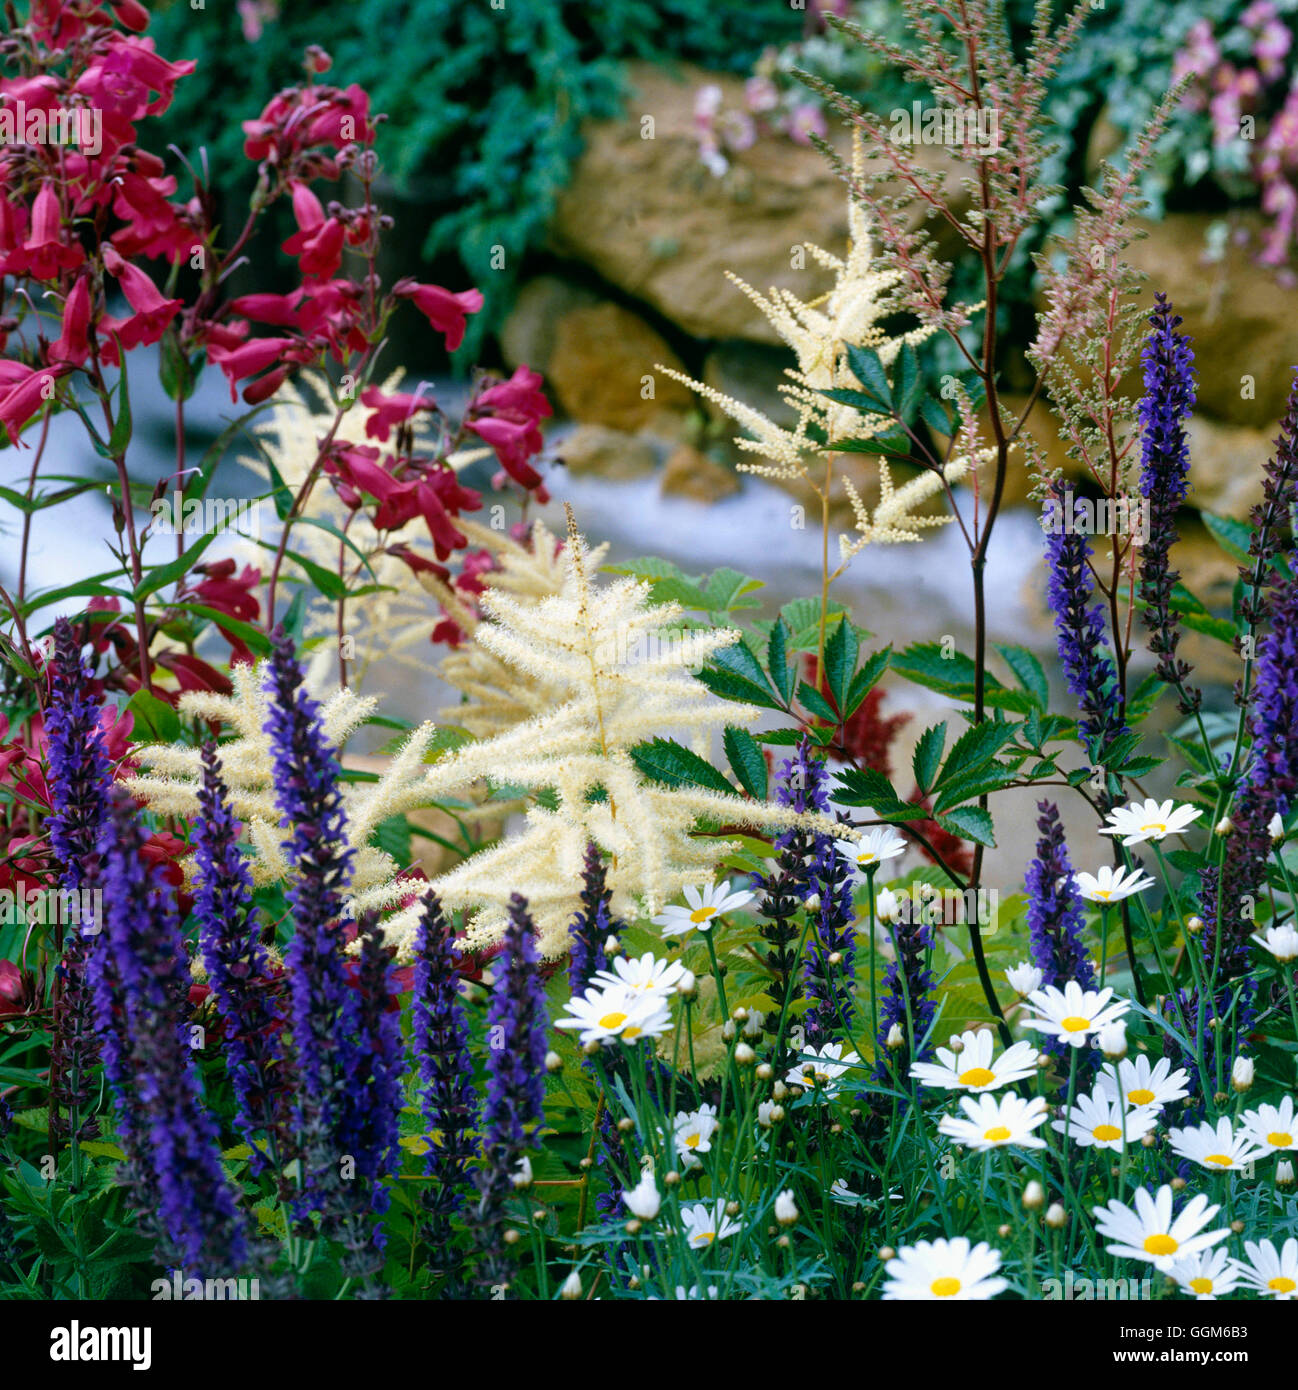 Title Page - with Penstemon  Salvia  Astilbe and Argyranthemum   TIT059816 Stock Photo